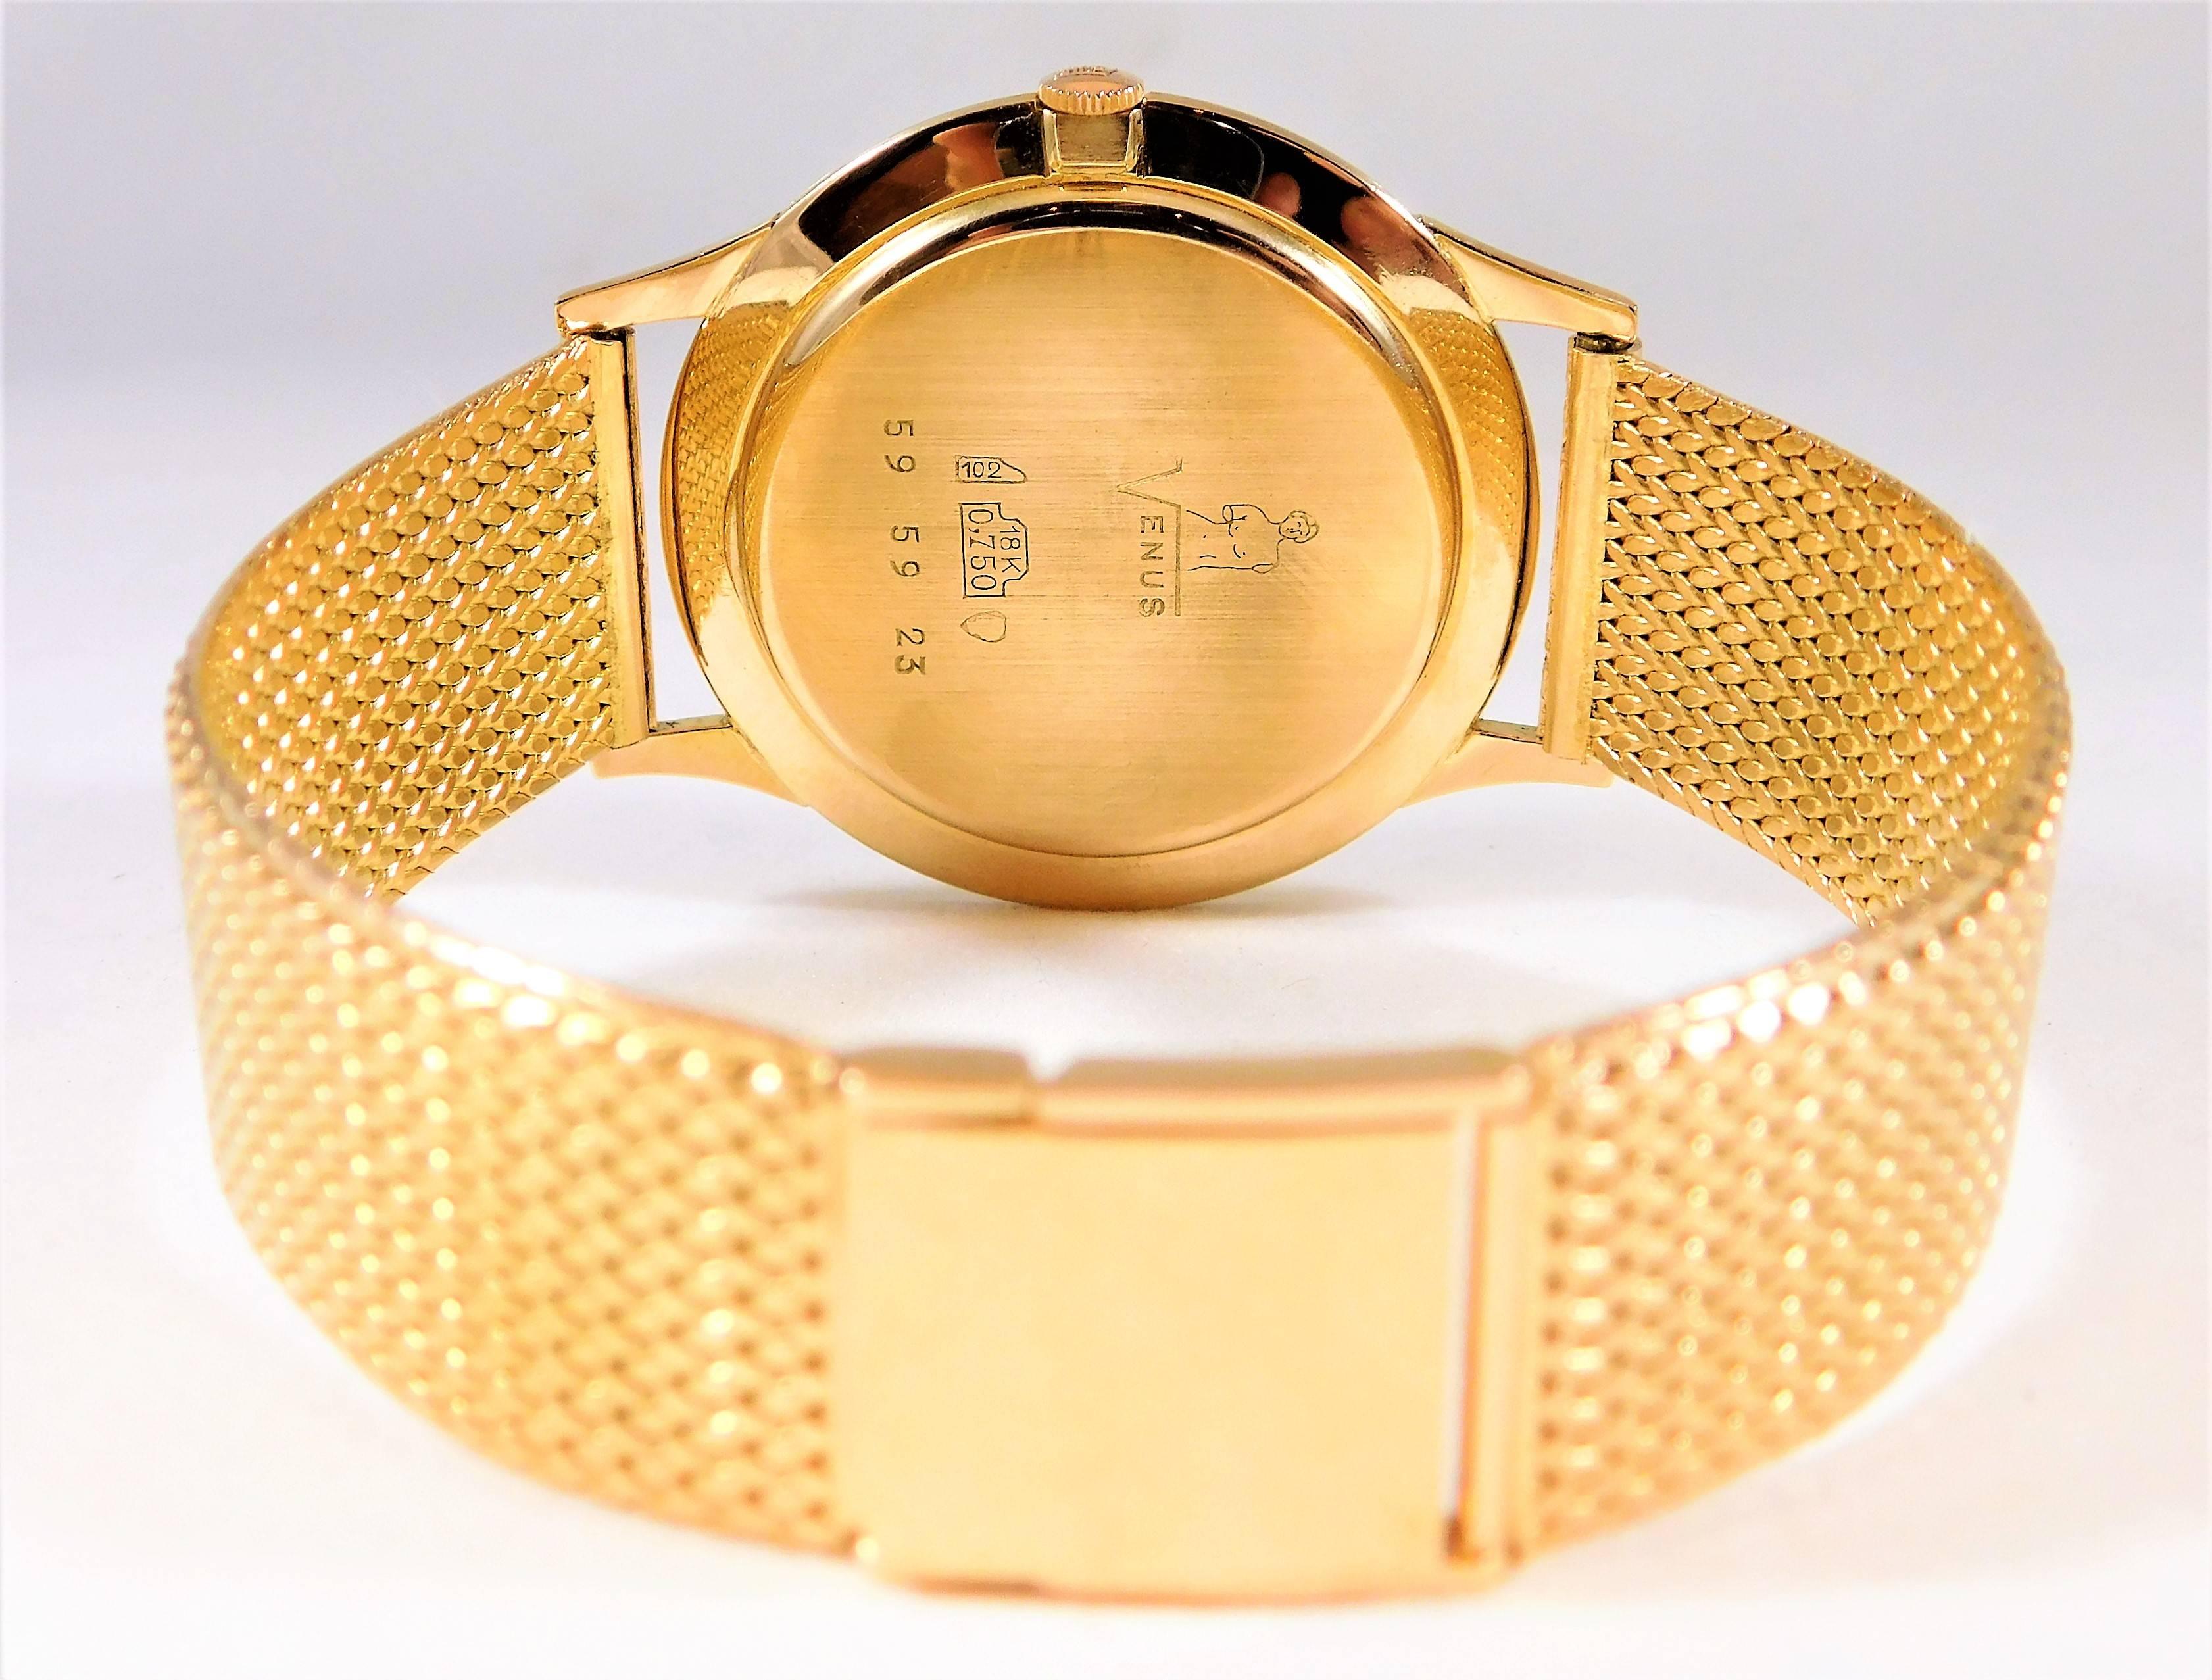 Venus Yellow Gold Extremely Rare Vintage Antimagnetic Mechanical Wristwatch In Excellent Condition For Sale In Metairie, LA